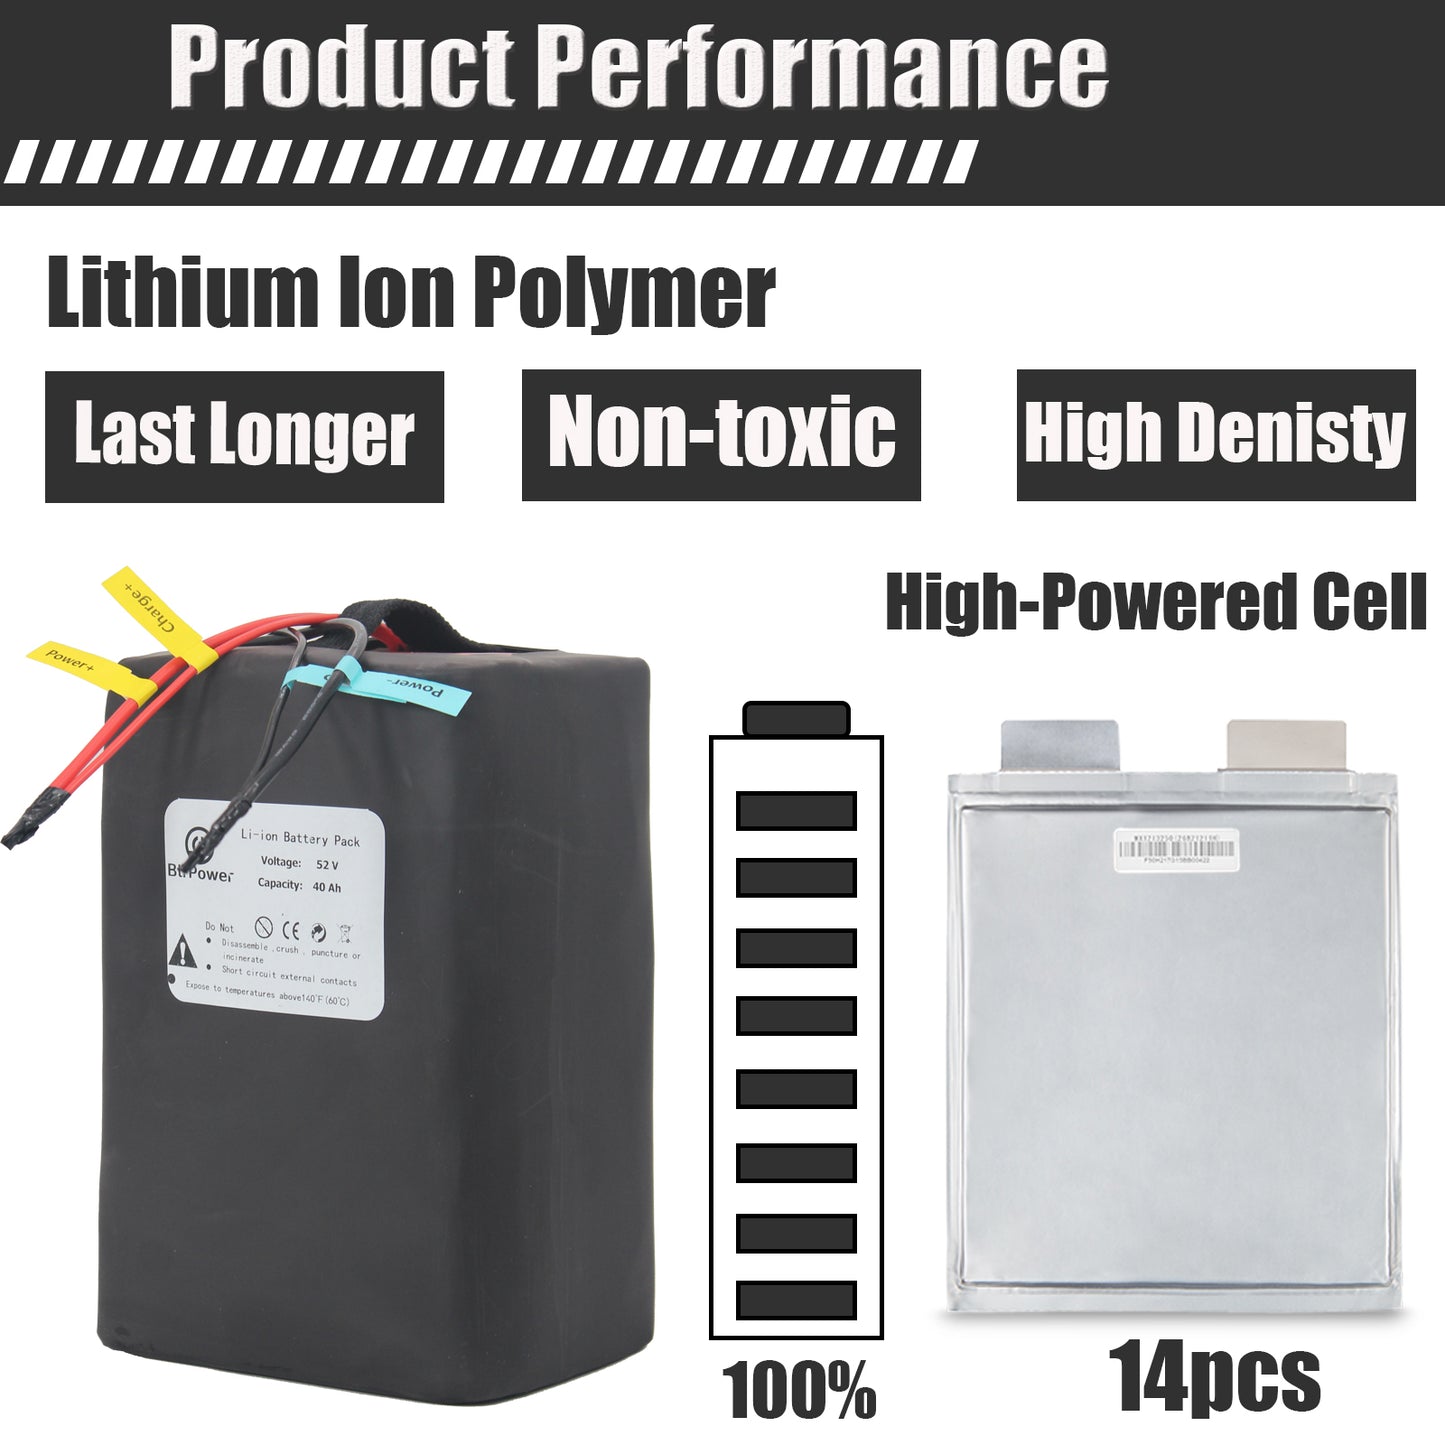 BtrPower EBike Battery 52V 40AH Li-ion Battery Pack with 5A Charger, 50A BMS